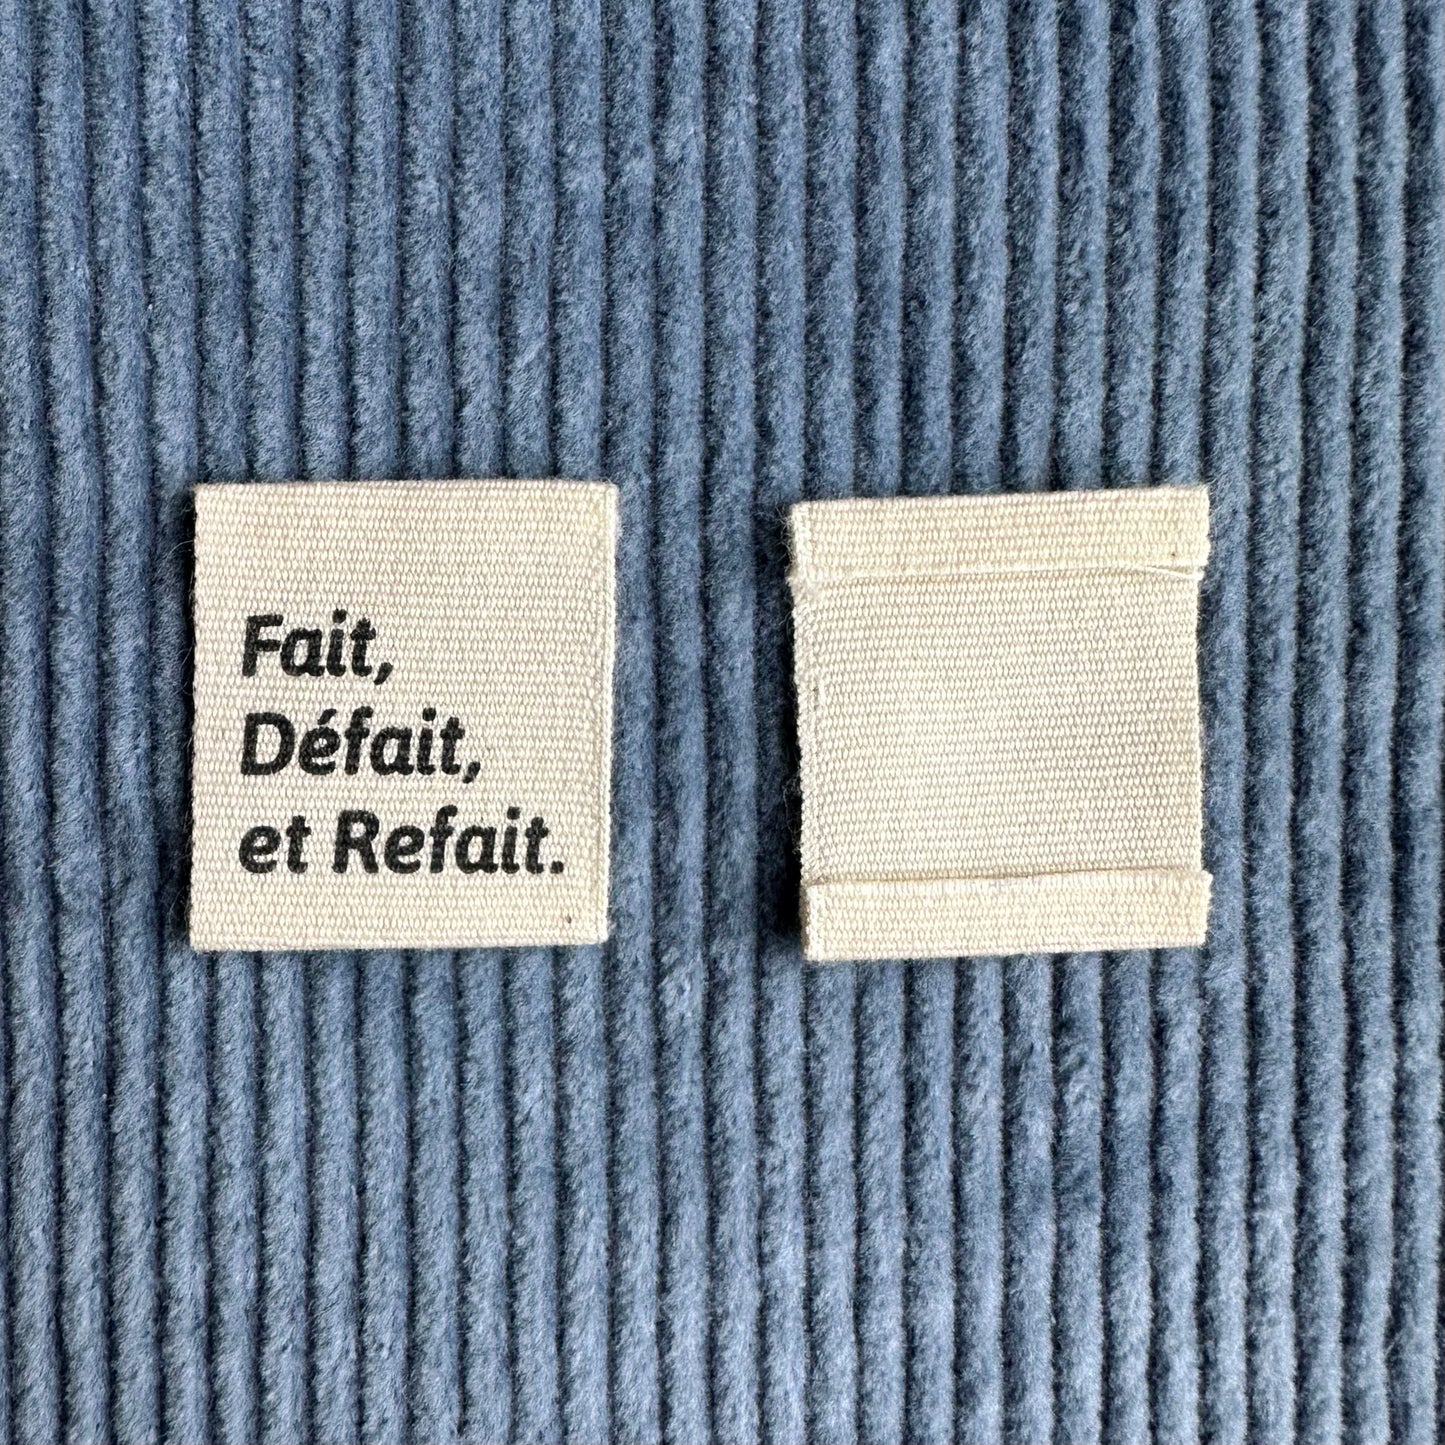 Done, undone and redone - Cotton labels in French